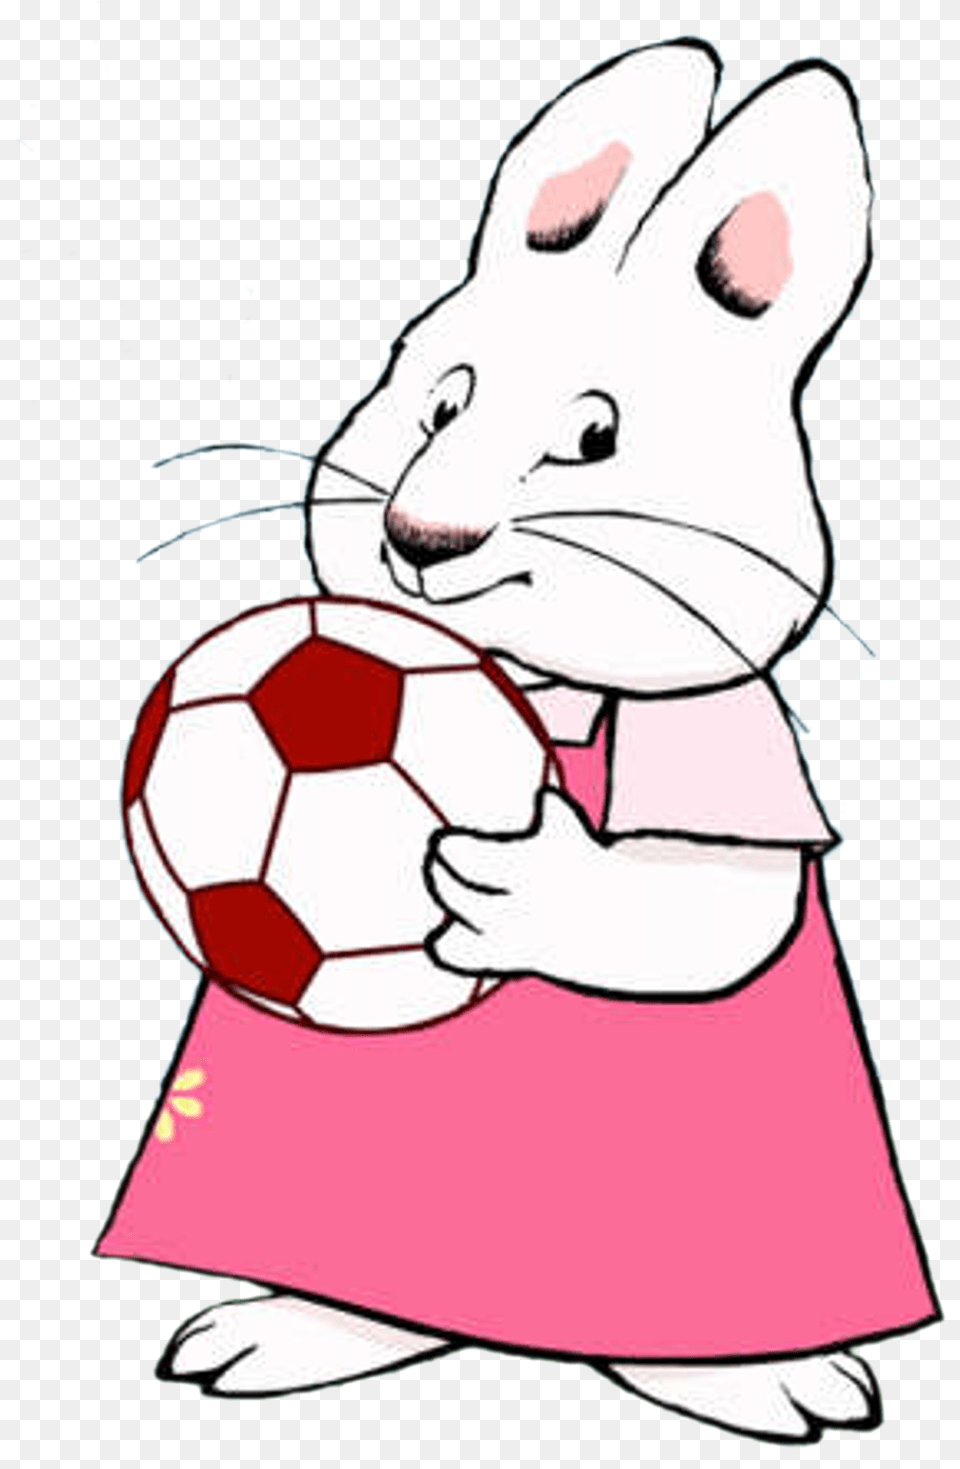 New S Max And Ruby, Ball, Football, Soccer, Soccer Ball Free Transparent Png